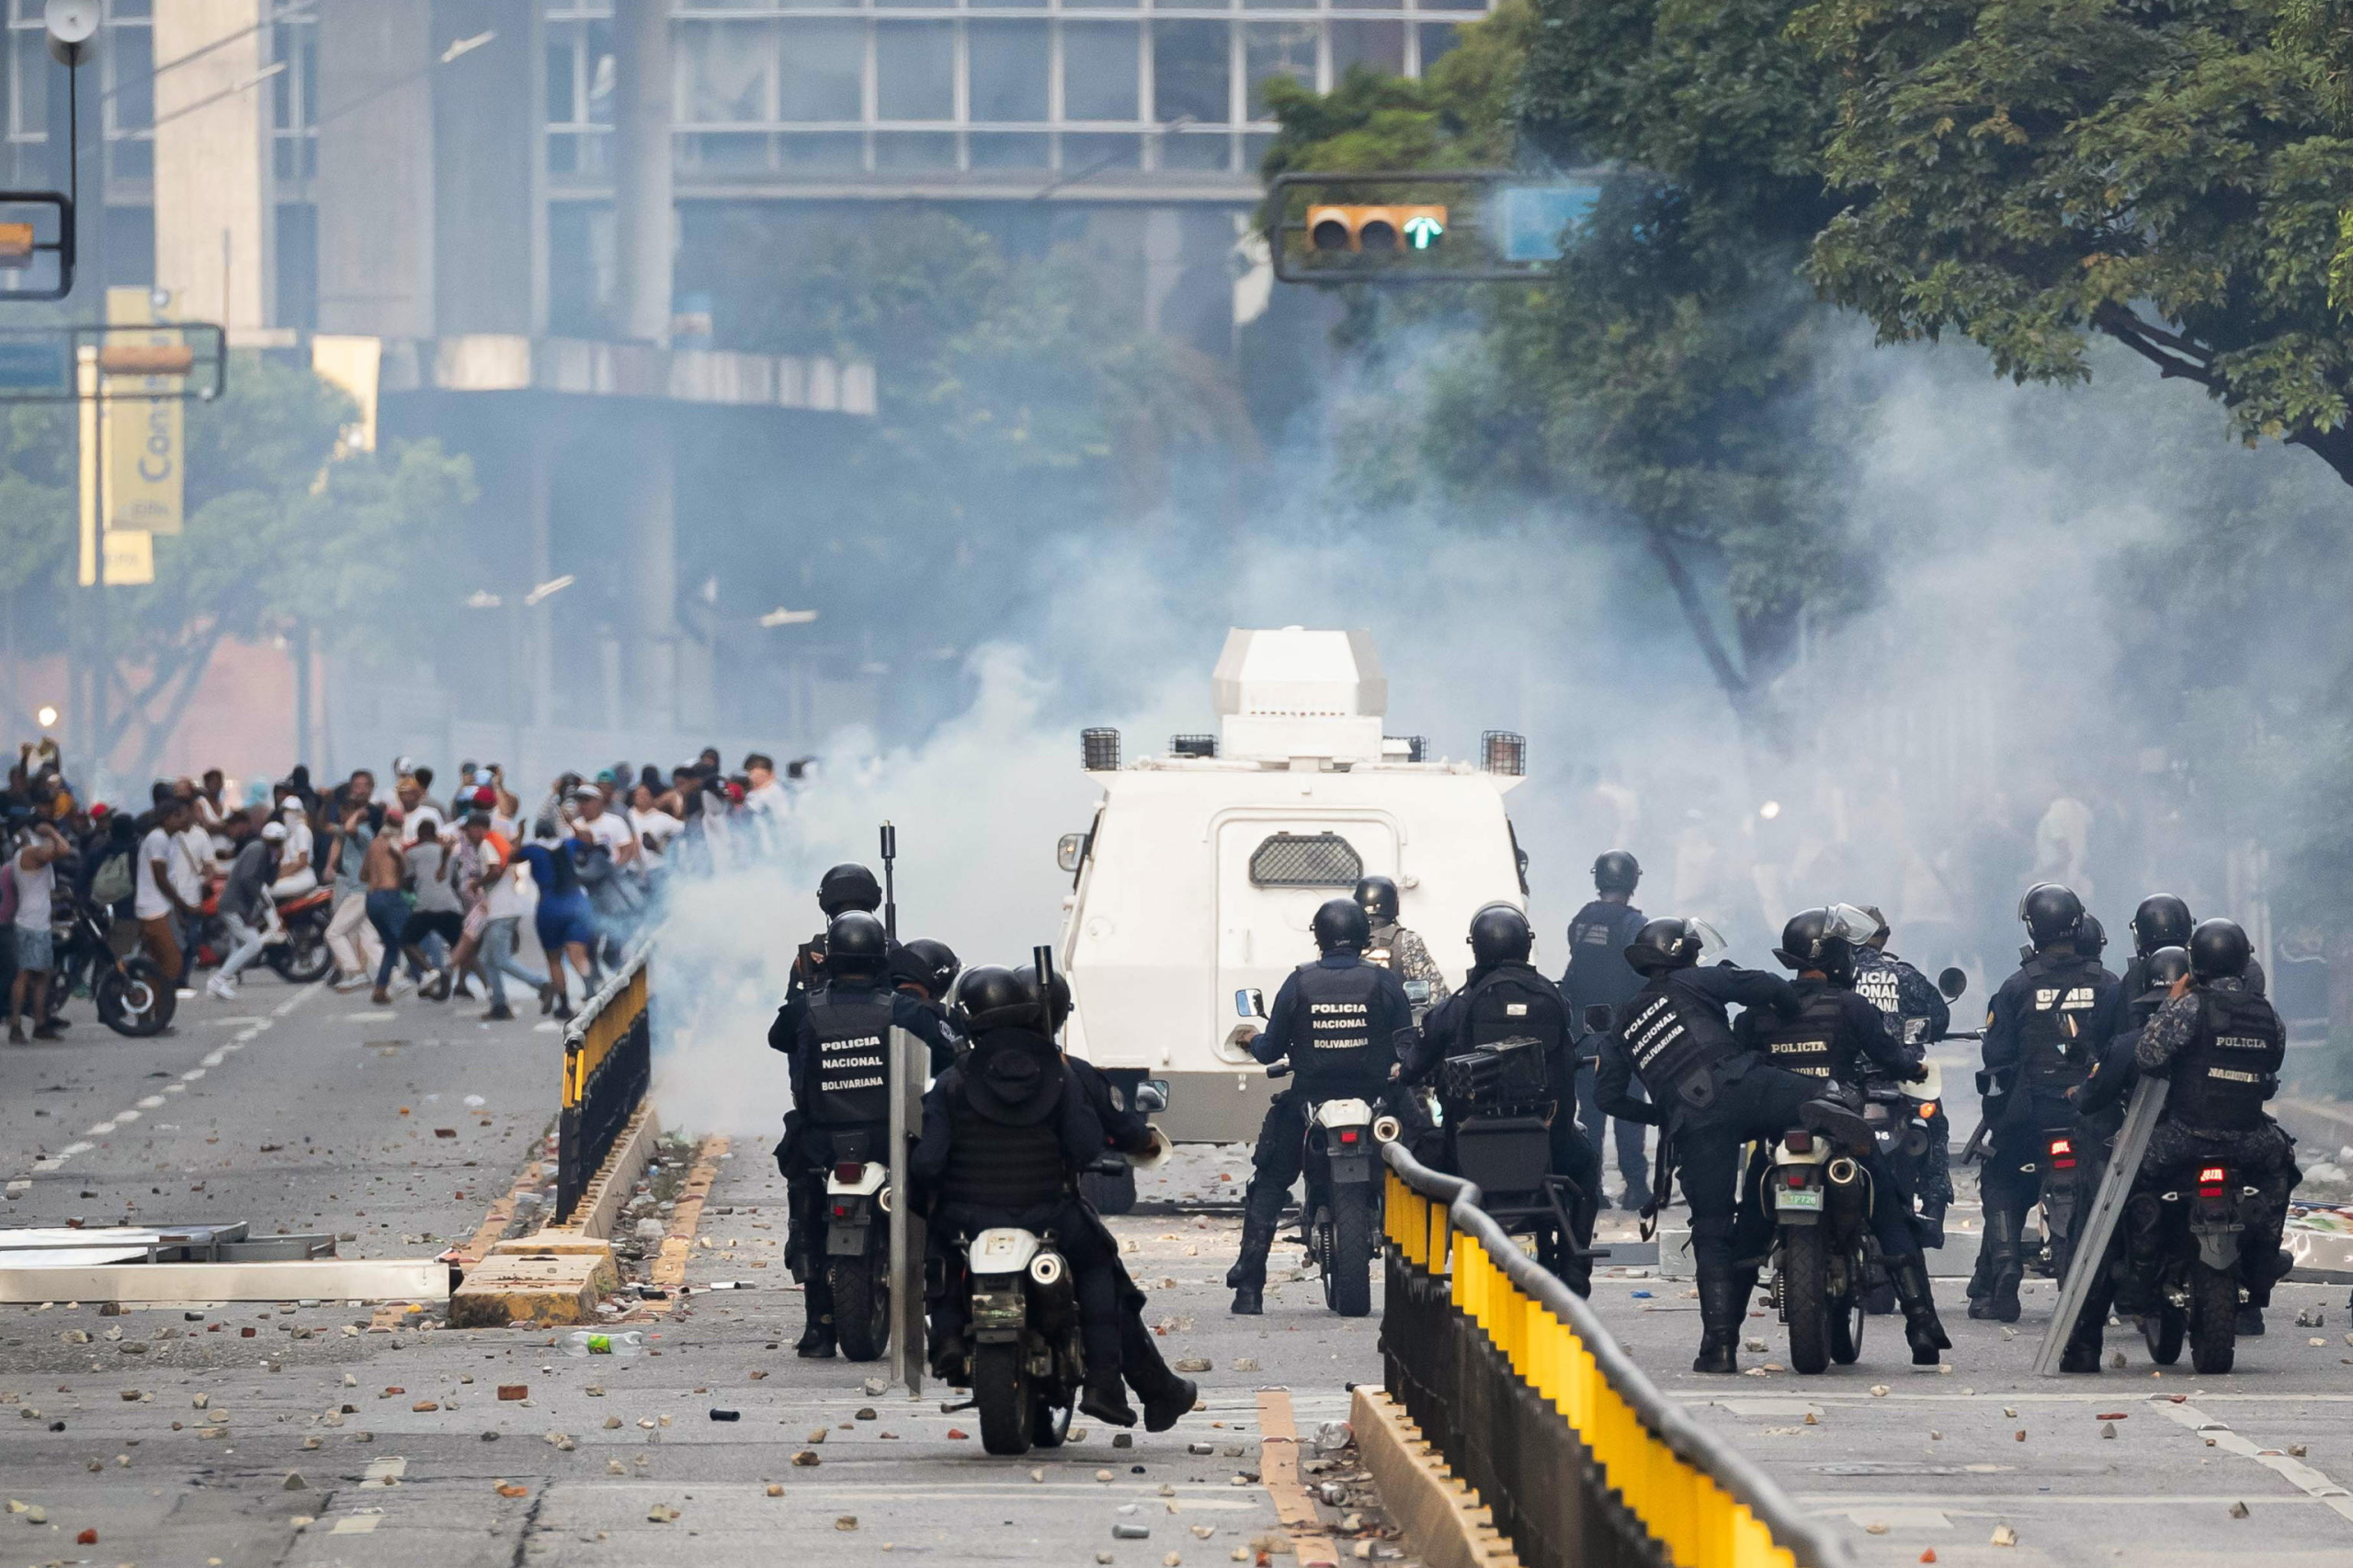 epaselect epa11507675 Members of the Bolivarian National Police (PNB) and the Bolivarian National Guard (GNB) clash with opposition demonstrators during protests over the results of the presidential elections in Caracas, Venezuela, 29 July 2024. Protests are taking place in Caracas after the National Electoral Council (CNE) proclaimed that Nicolas Maduro was re-elected president of Venezuela, following elections held on 28 July. Thousands of citizens have come out to protest against the results announced by the National Electoral Council (CNE), which gave President Maduro 51.2% of the votes, a figure questioned by the opposition and by a good part of the international community. Opposition leader Maria Corina Machado claims they have obtained enough of the vote tallies to prove they won the presidential elections that took place on 28 July.  EPA/Henry Chirinos